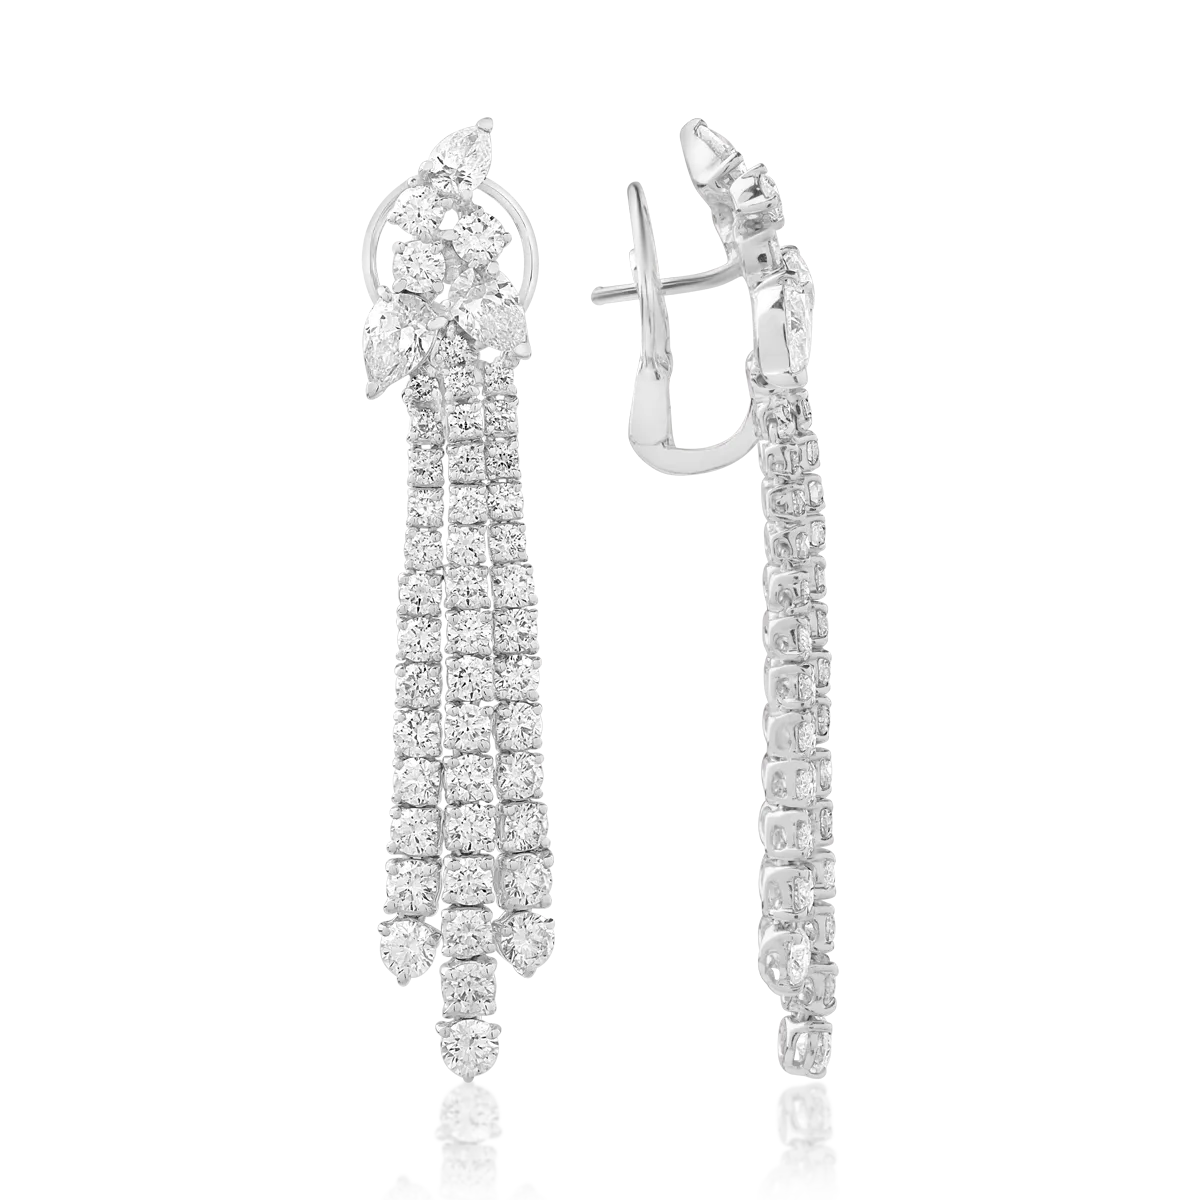 18K white gold earrings with 6.9ct diamonds